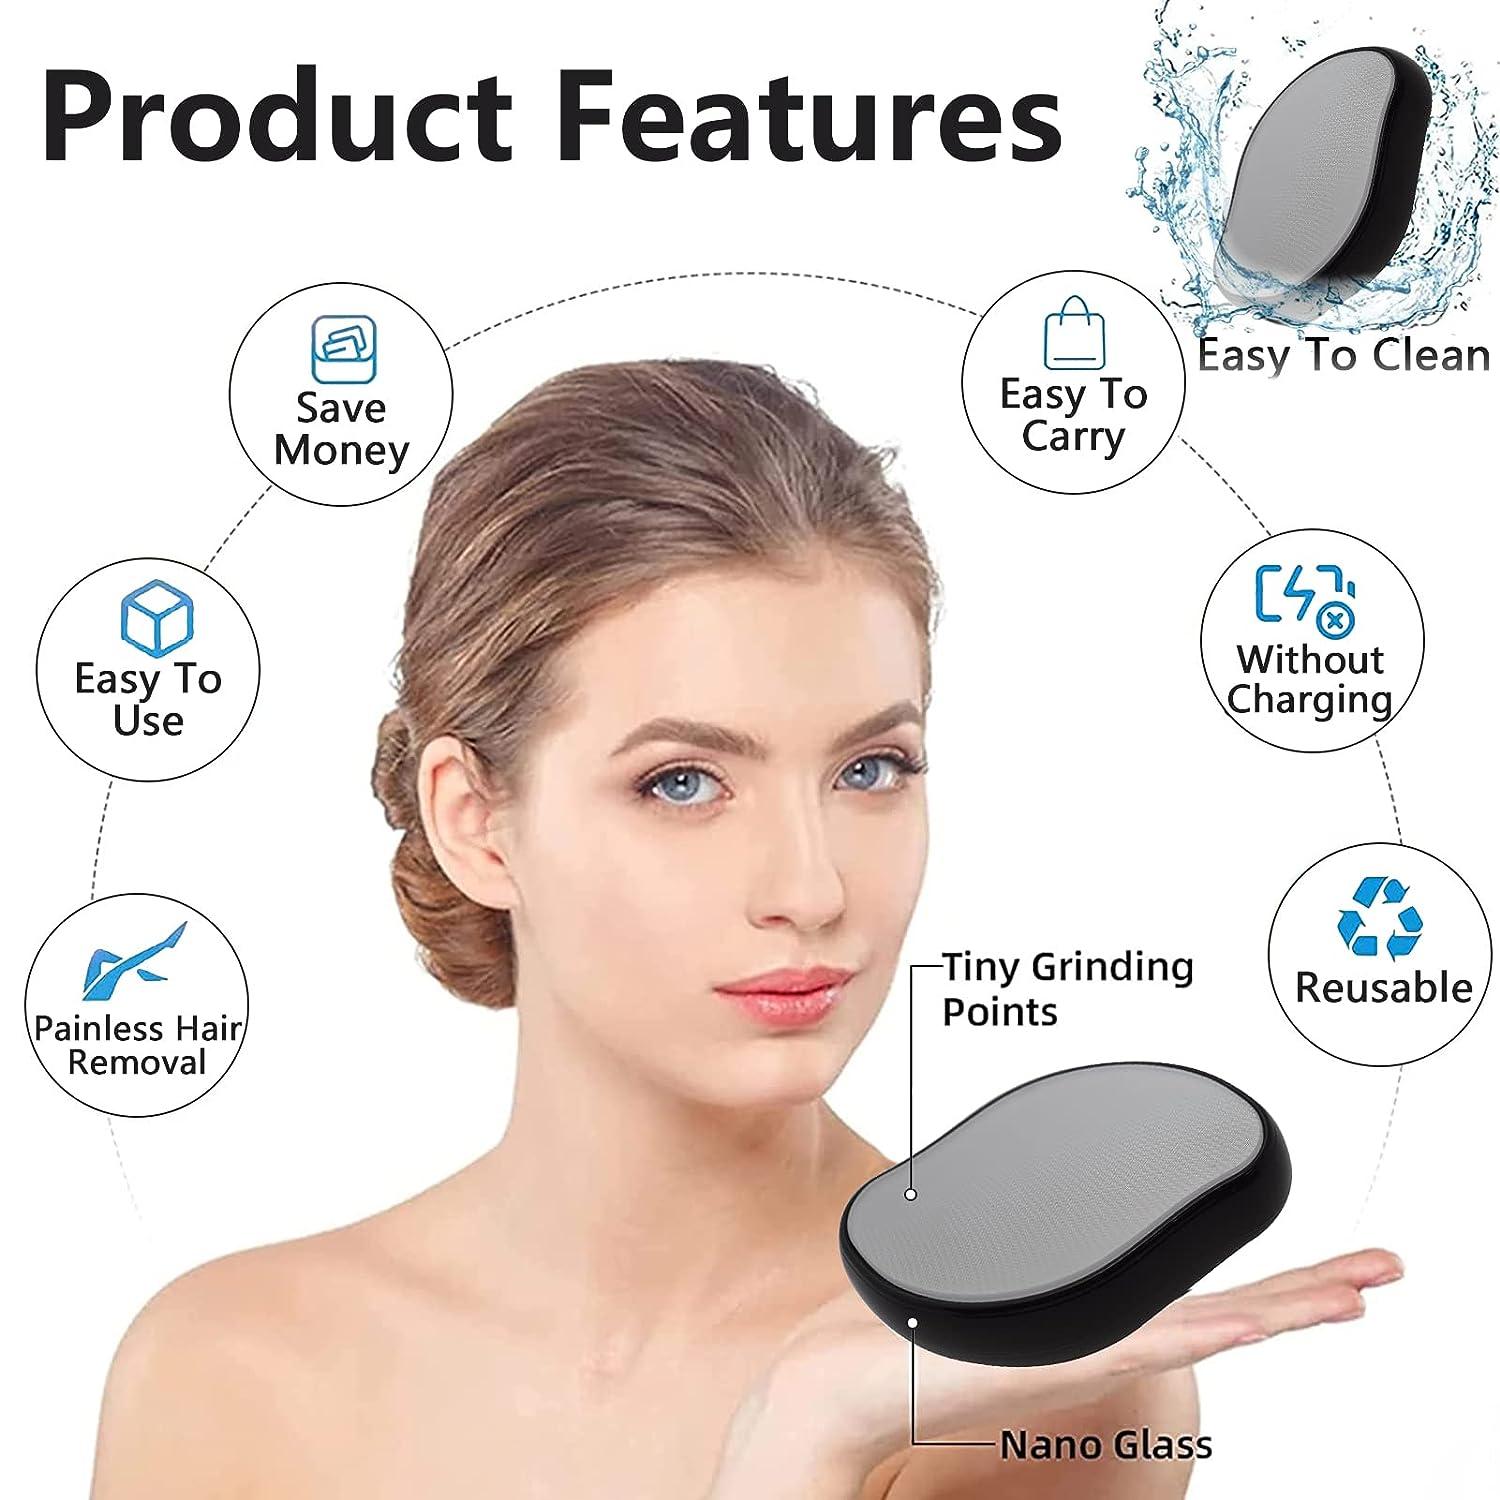 Crystal Hair Eraser For Women And Men, Magic Painless Hair Remover Skin Exfoliator  Tool, Washable Nano Hair Removal For Arms Legs Back Body Any Part (